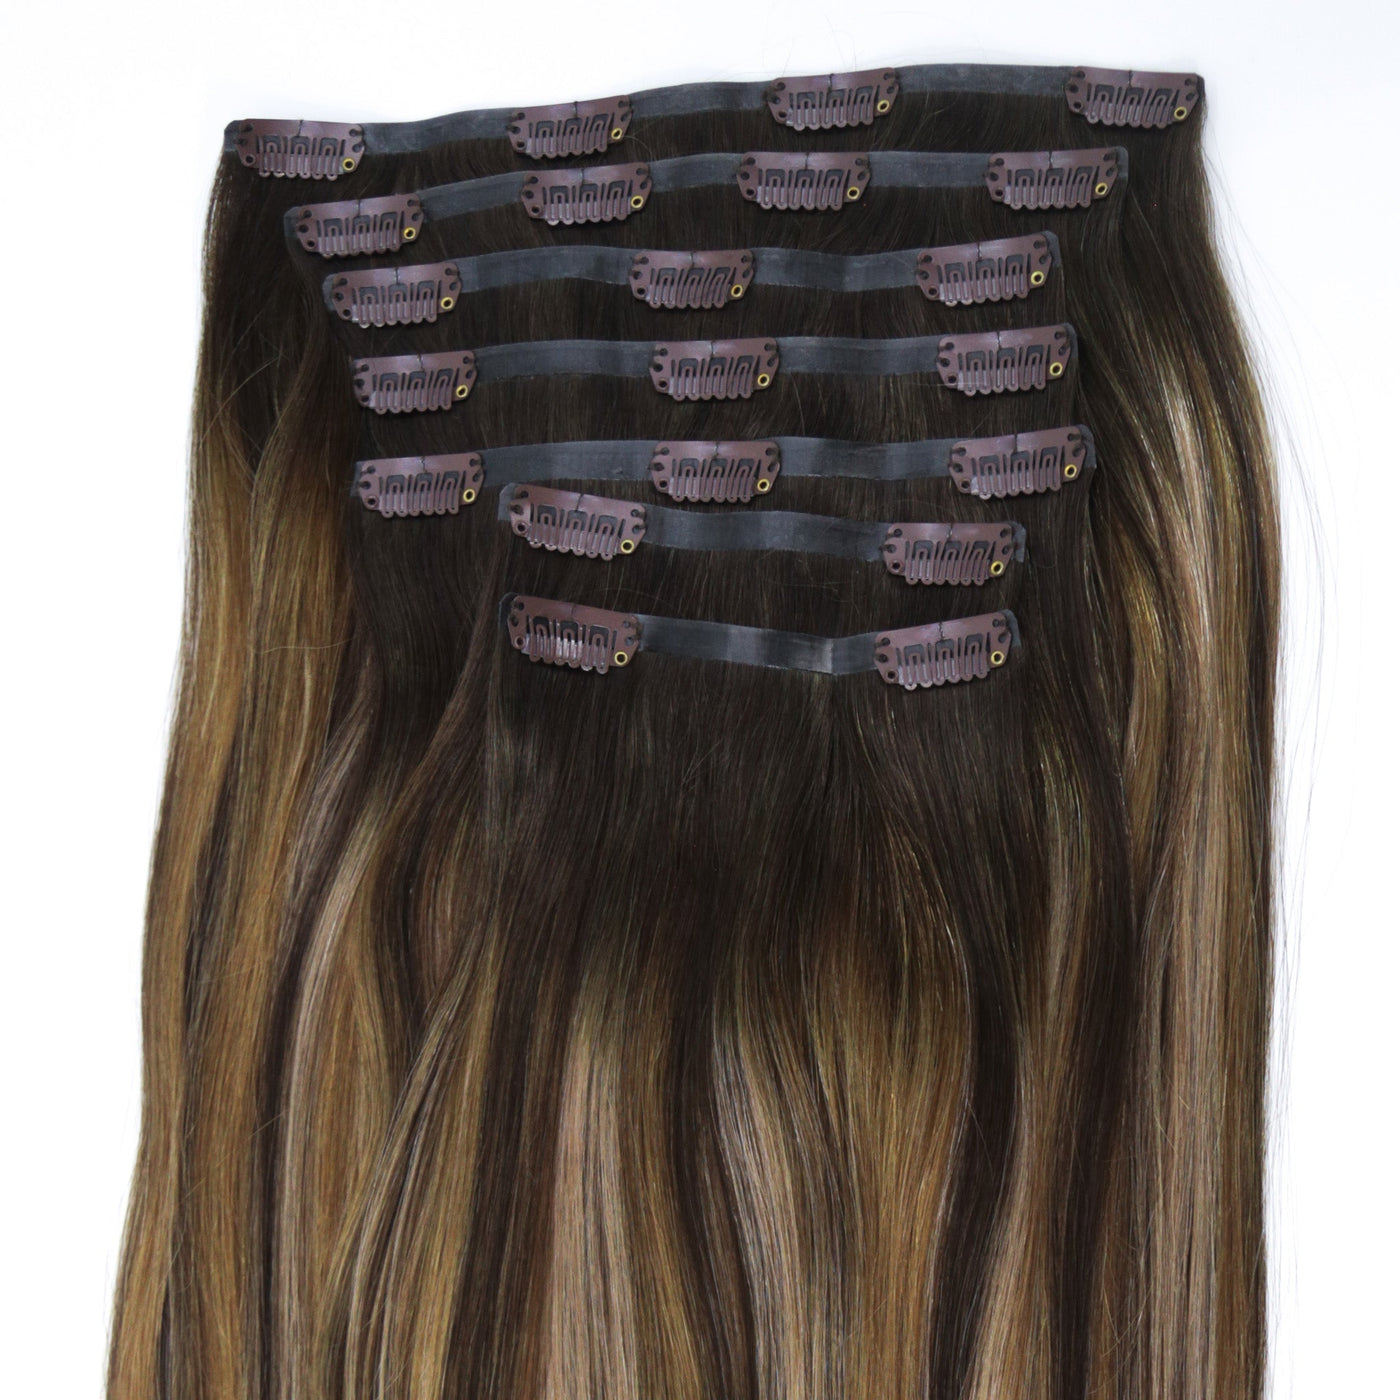 Pacific Balayage Ultra Narrow Clip In Hair Extensions